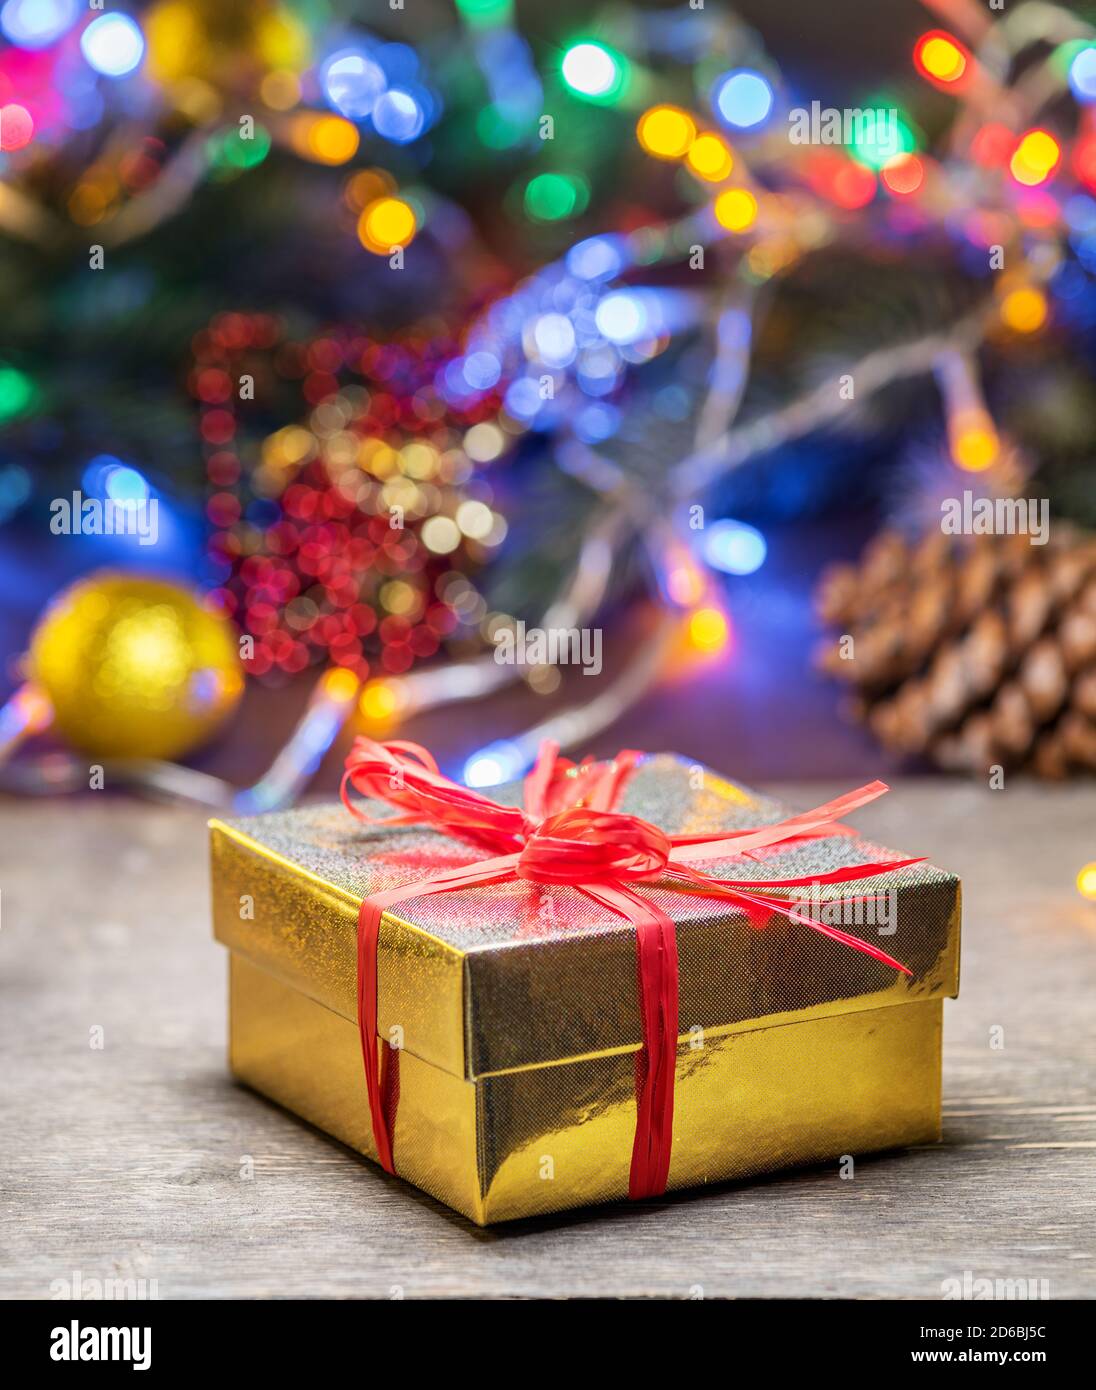 Beautiful Christmas gifts in decorated boxes near a Christmas tree in the home. Stock Photo